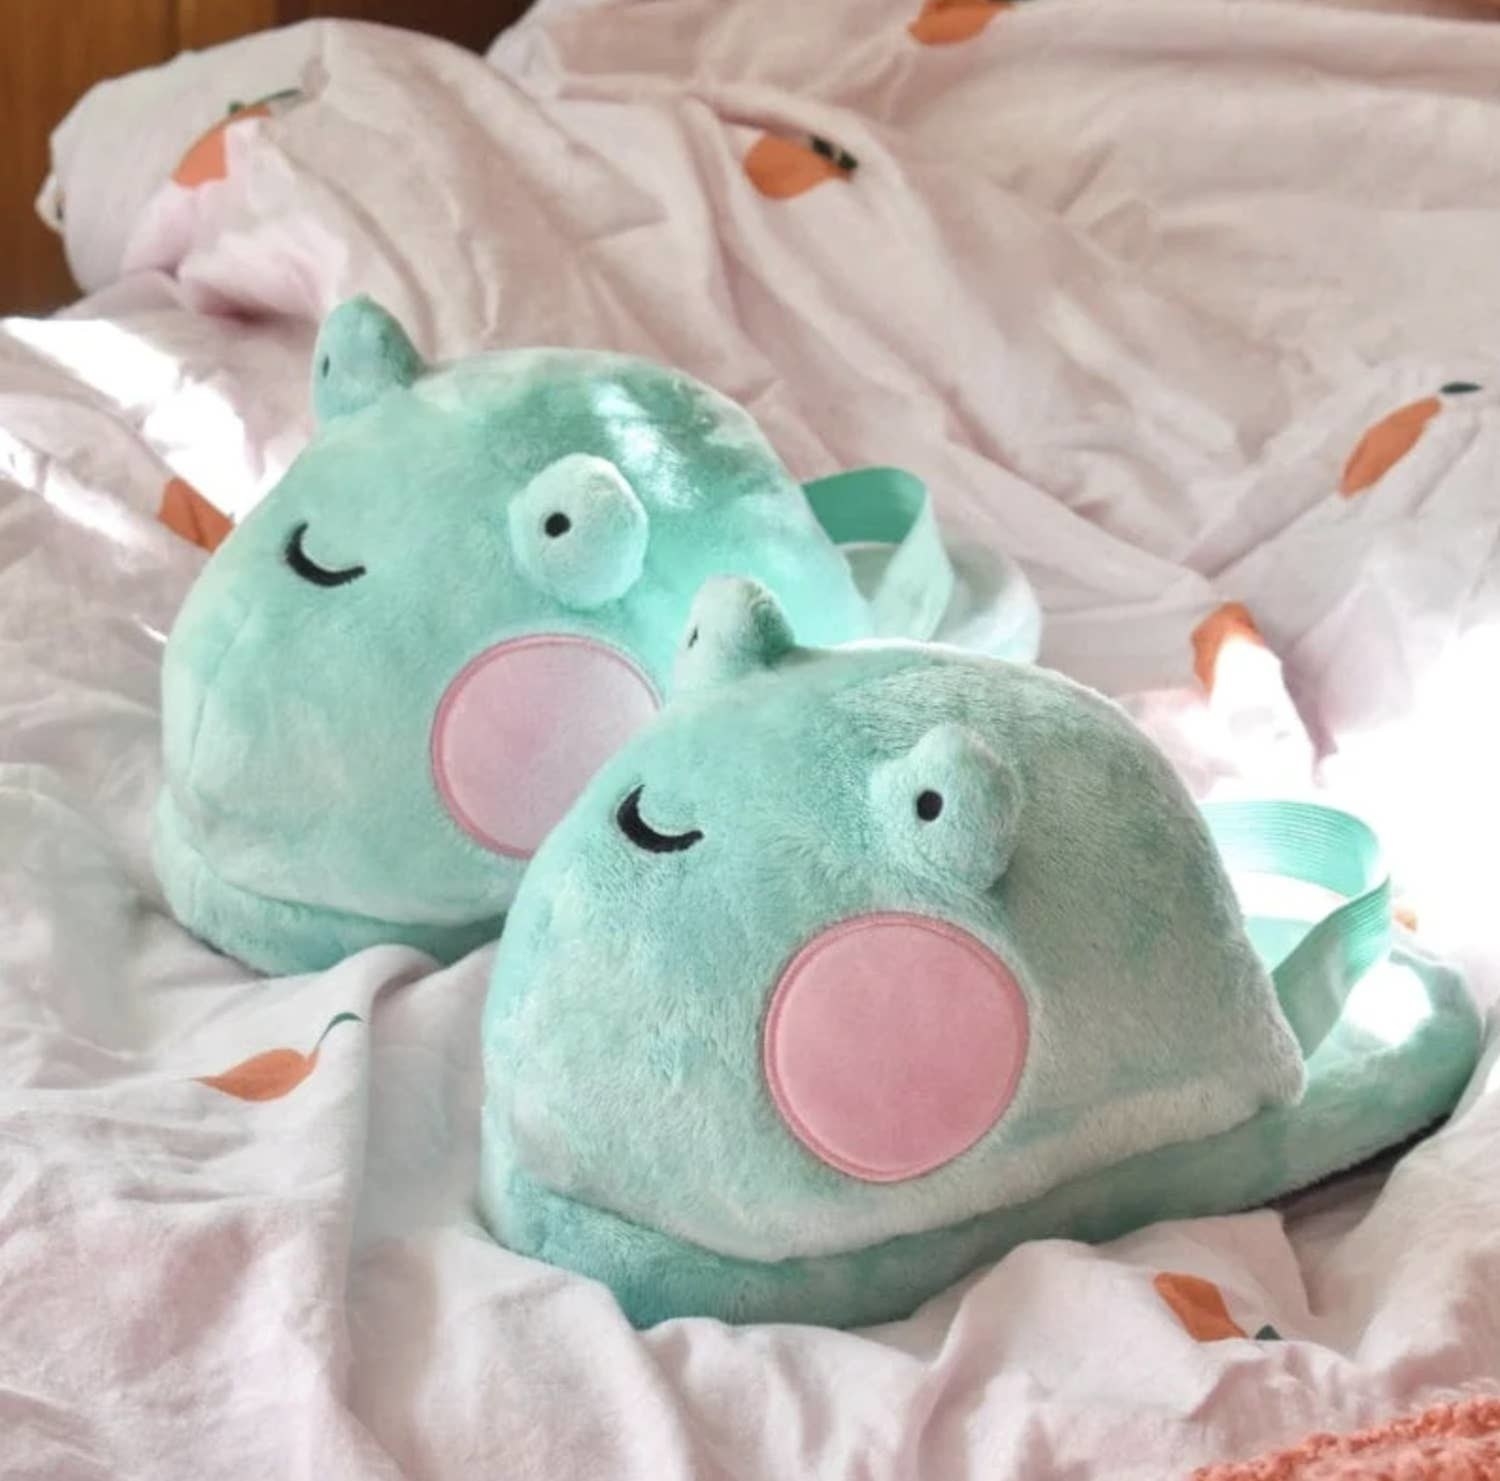 frog slippers on a cozy bed